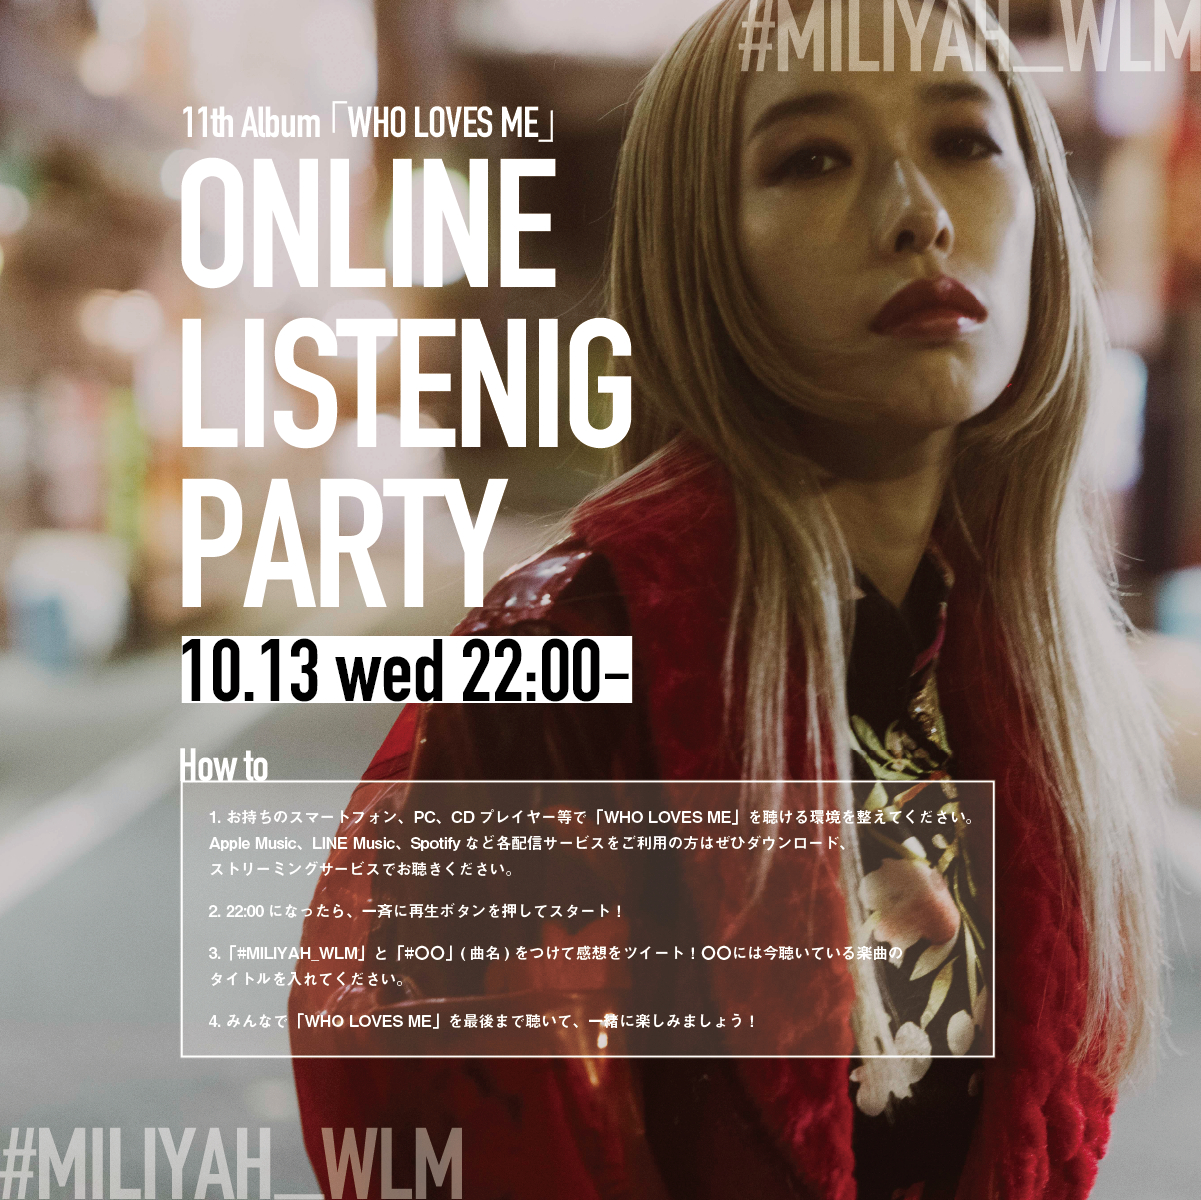 ONLINE LISTENING PARTY